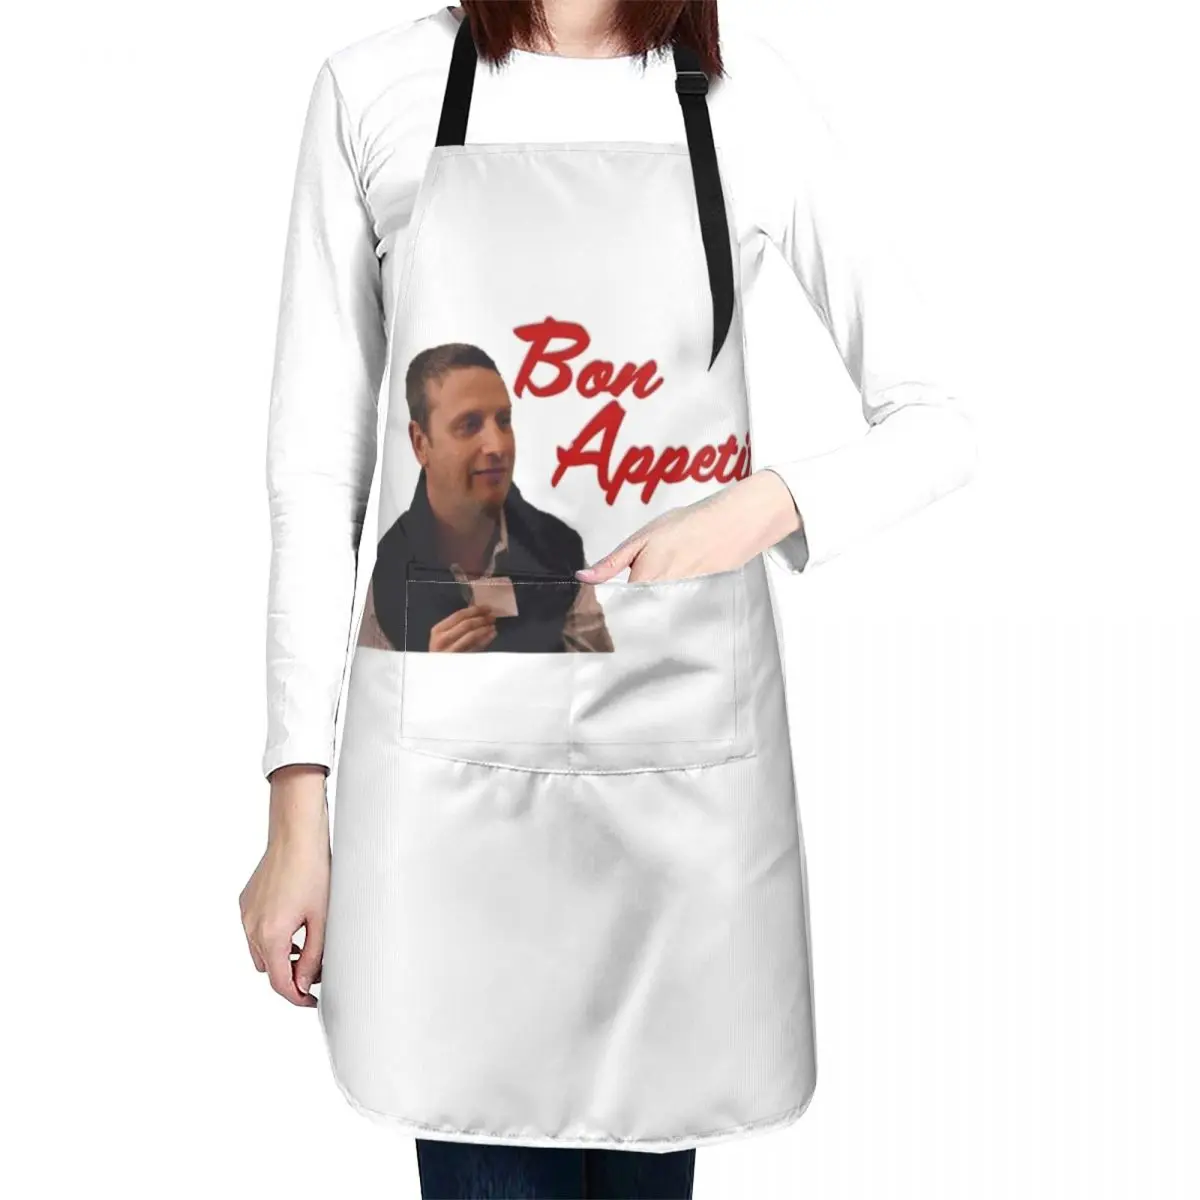 Bon Appetit! Apron Kitchen Things And For Home Professional Barber Apron